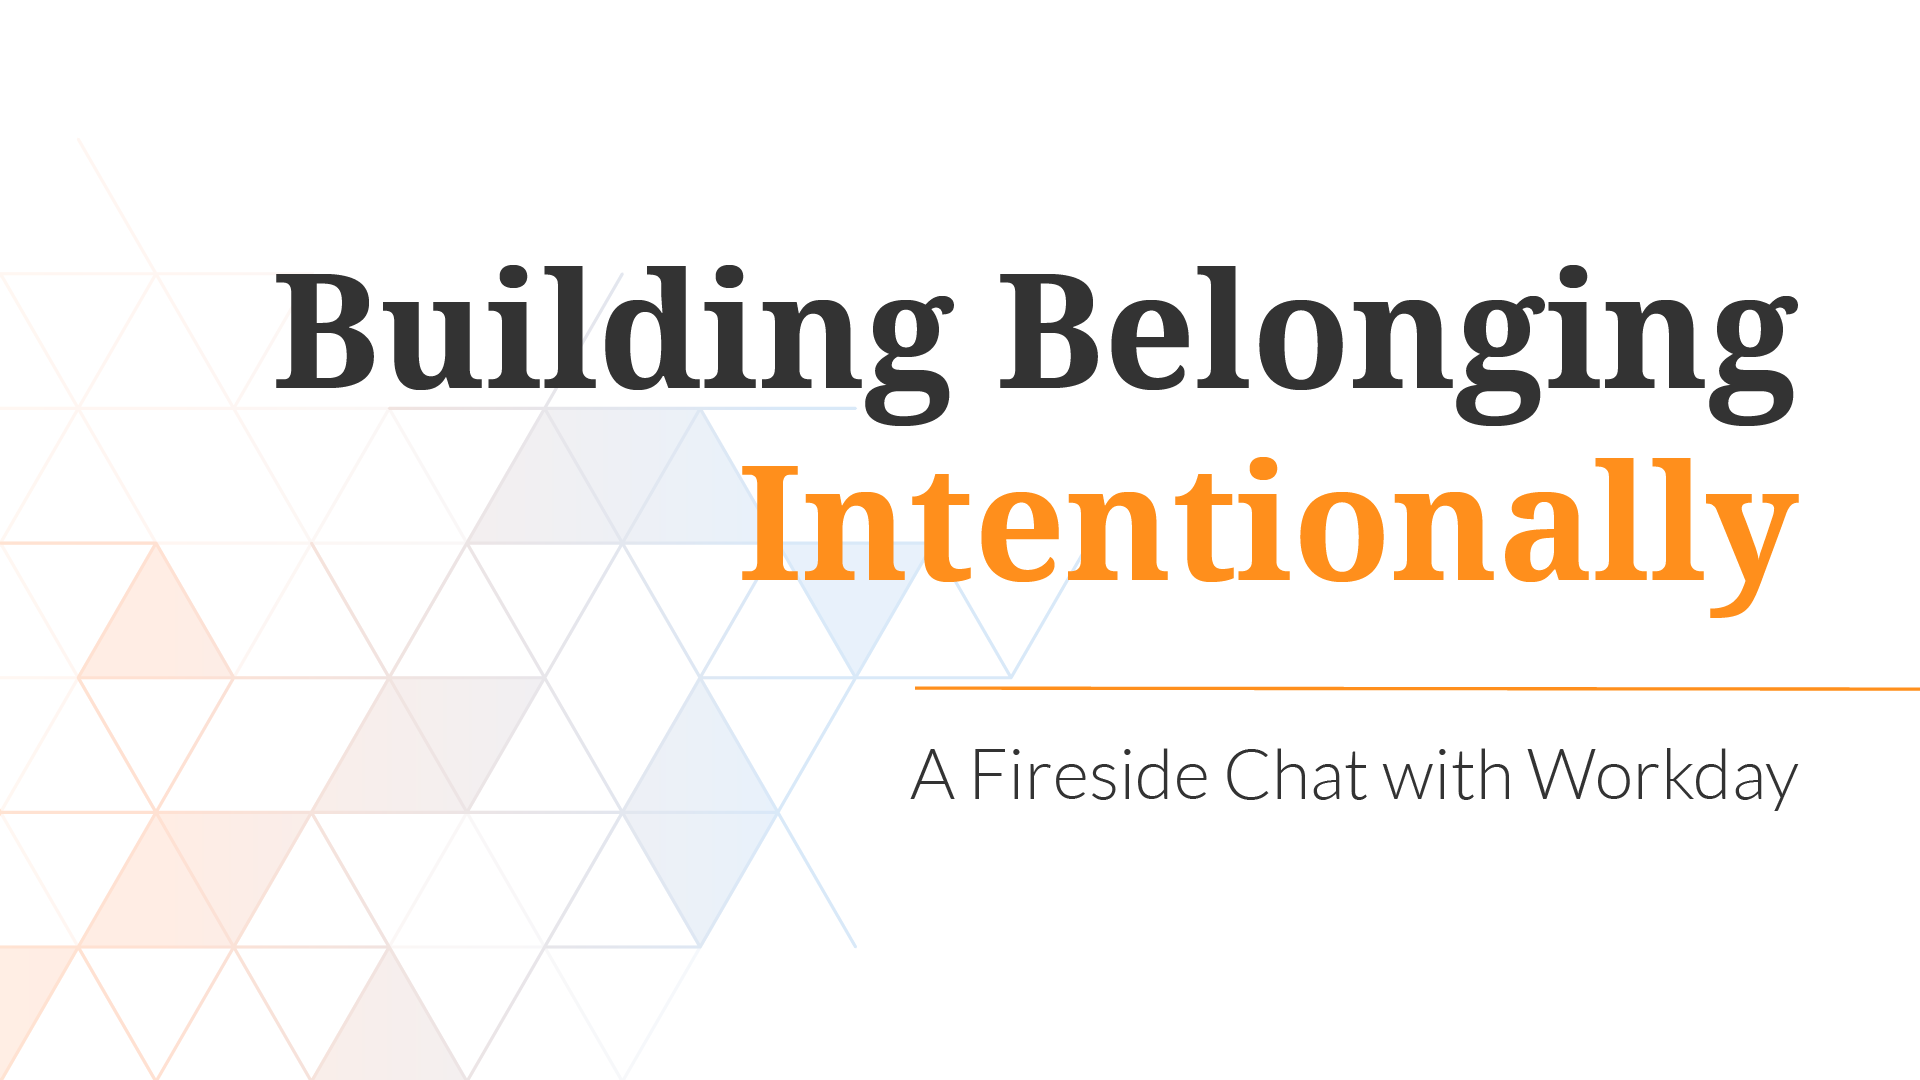 Build Belonging Intentionally: A Fireside Chat with Workday